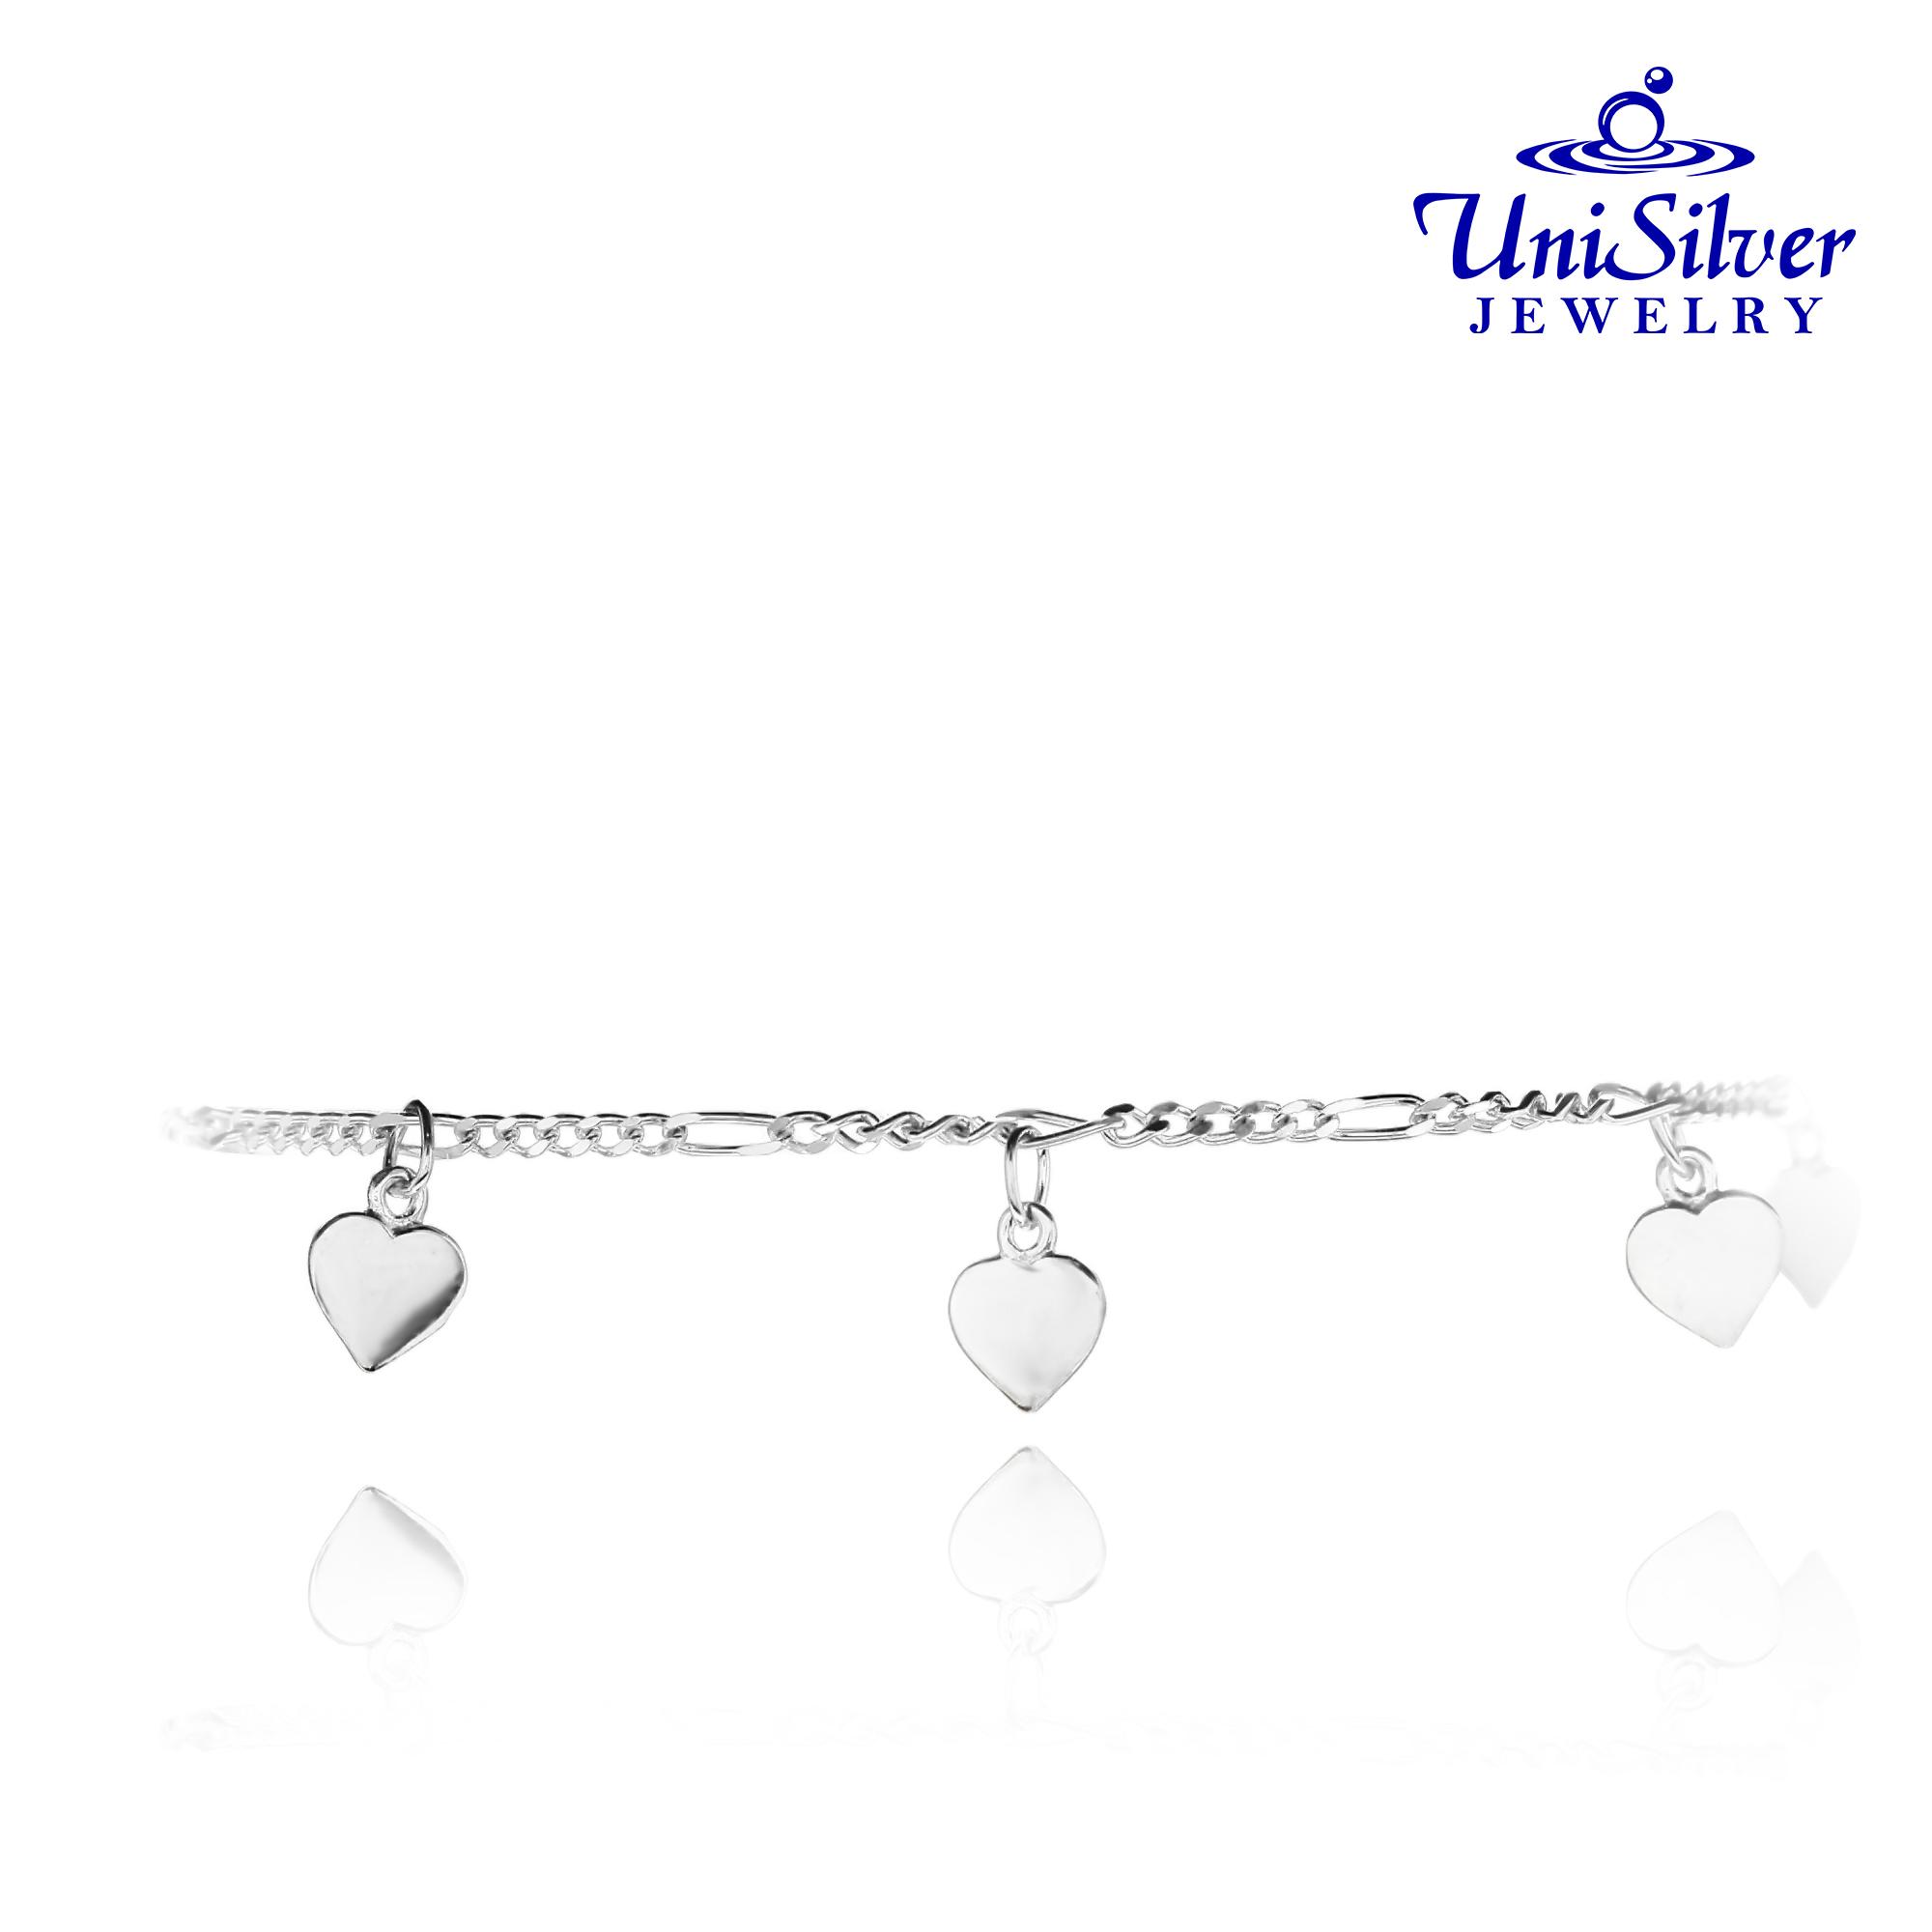 PANSYSEN 100% Solid Real 925 Sterling Silver Box Chain Link Bracelet For  Women Girls Lady 19CM Womens Fine Jewelry Bracelets225w From Ivumj, $33.29  | DHgate.Com